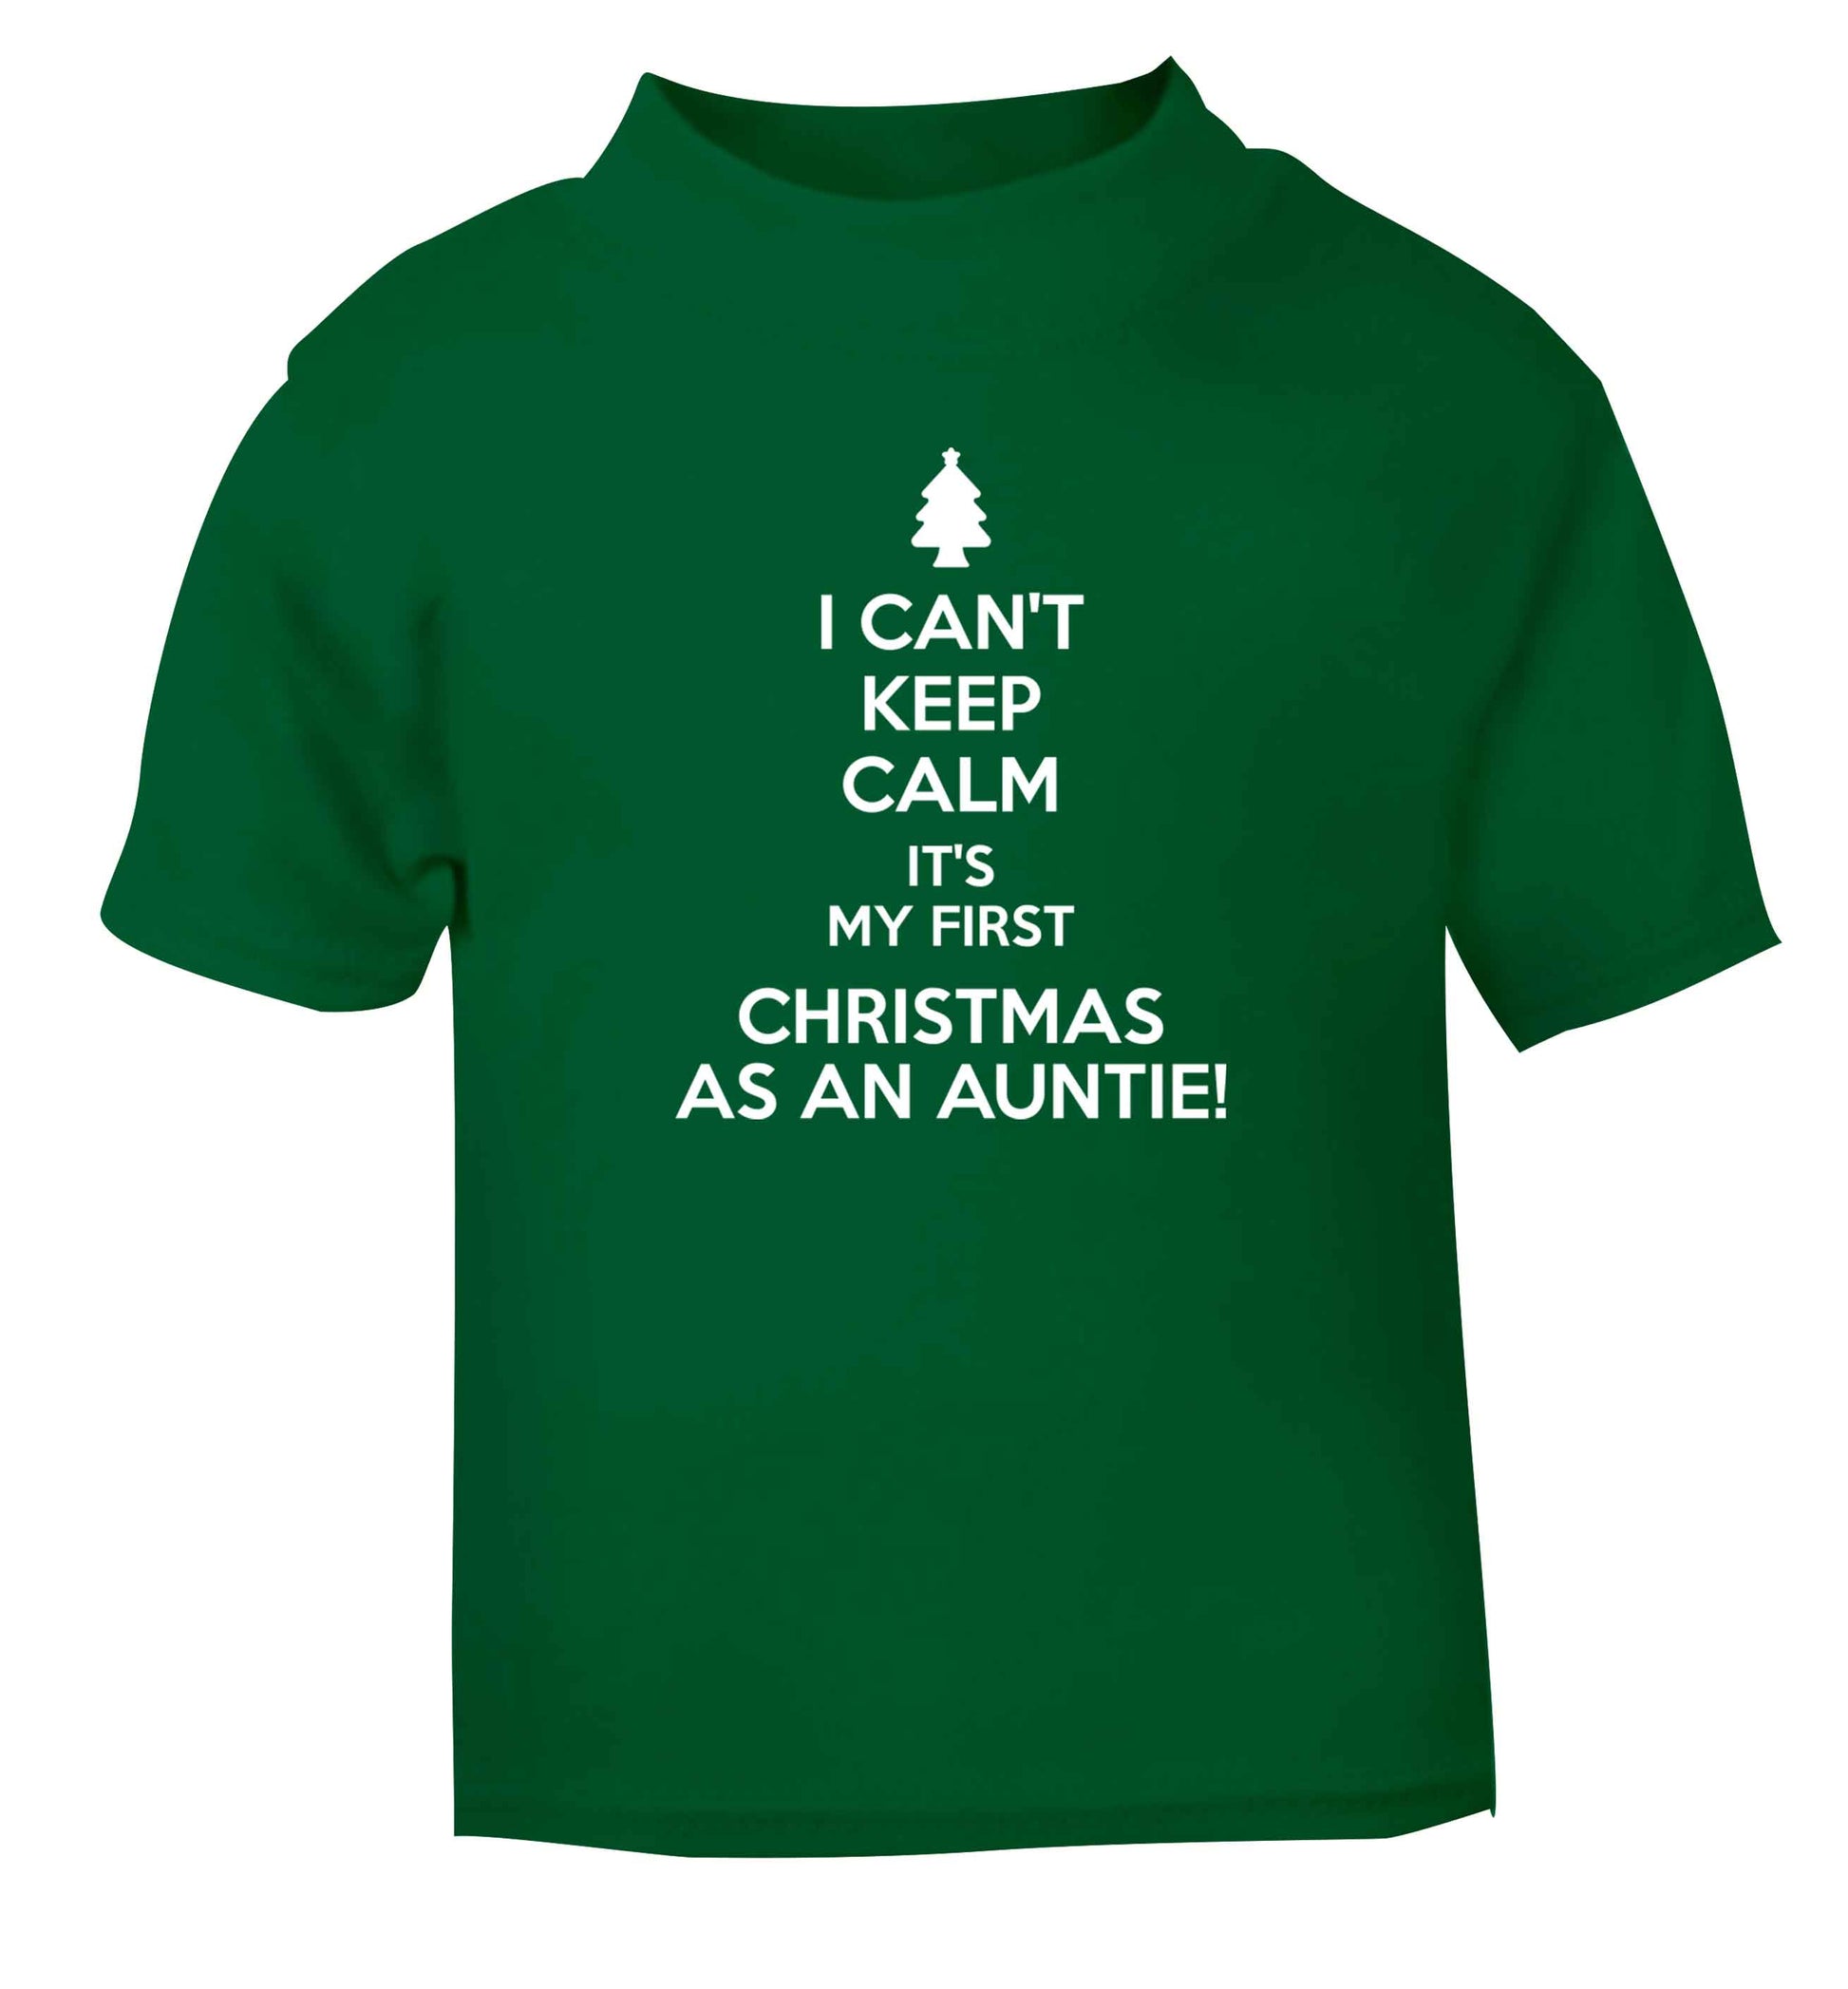 I can't keep calm it's my first Christmas as an auntie! green Baby Toddler Tshirt 2 Years